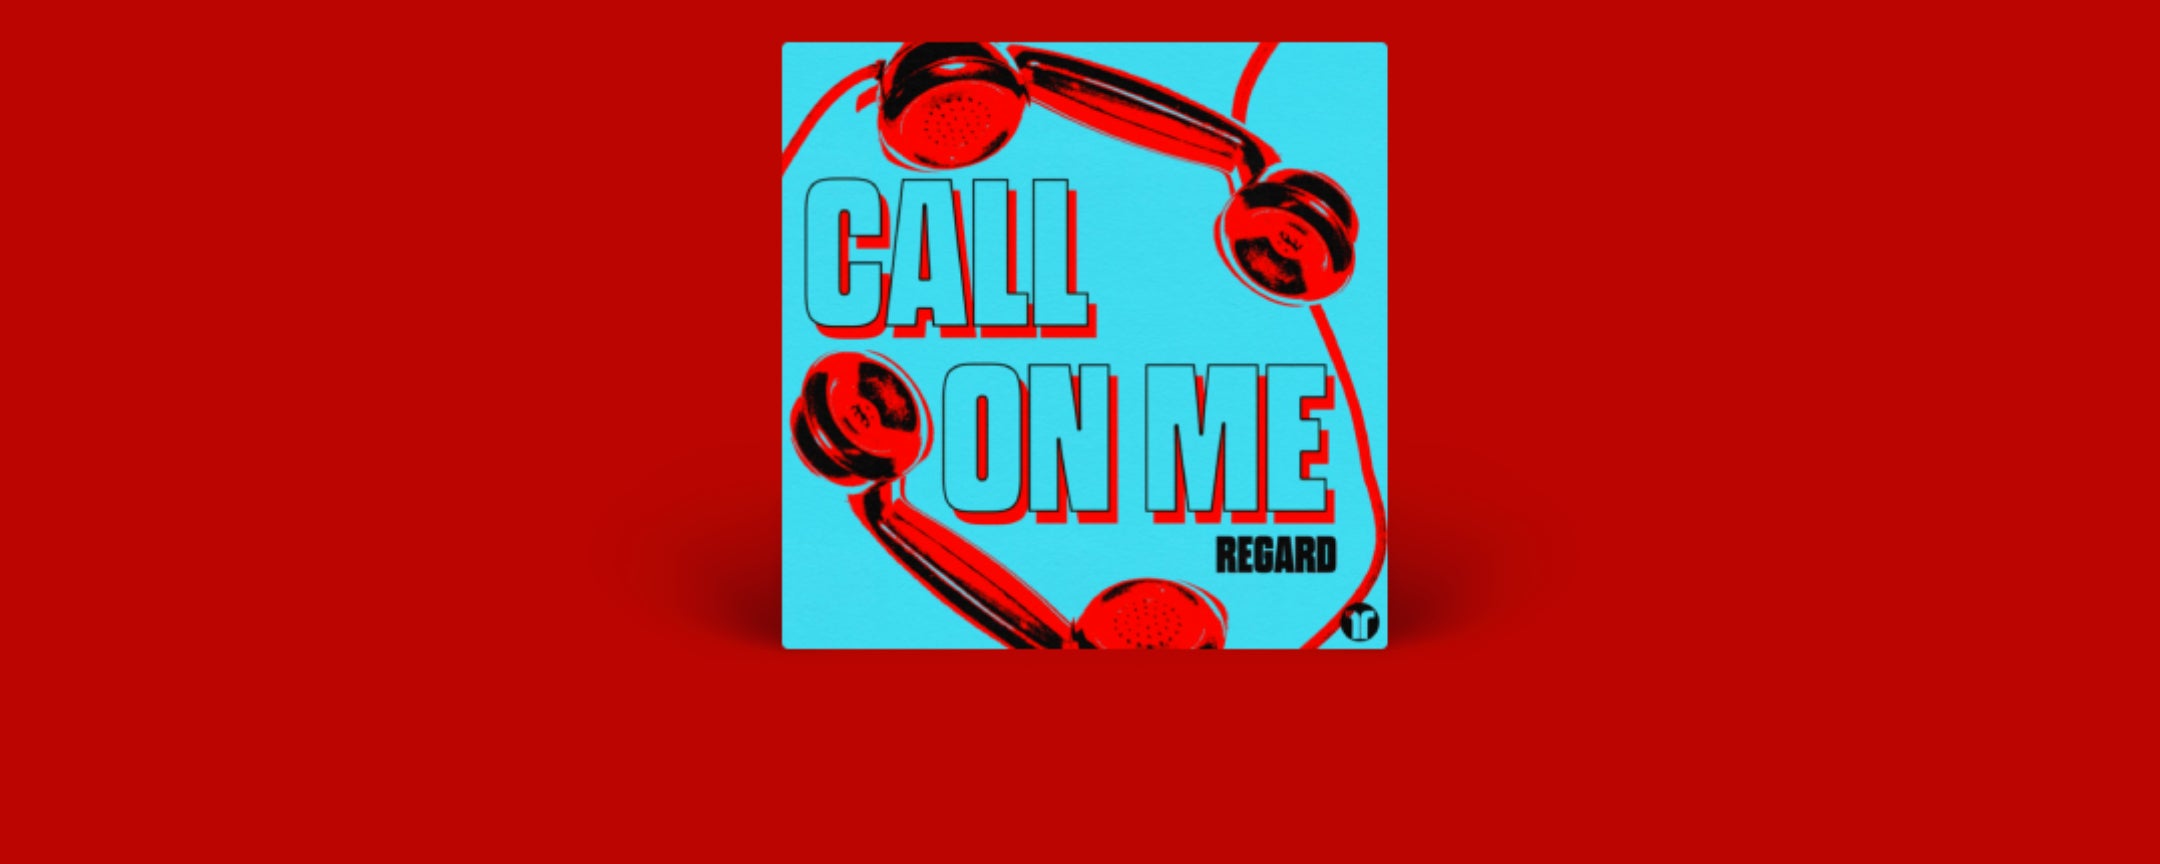 Call On Me (Extended Mix)